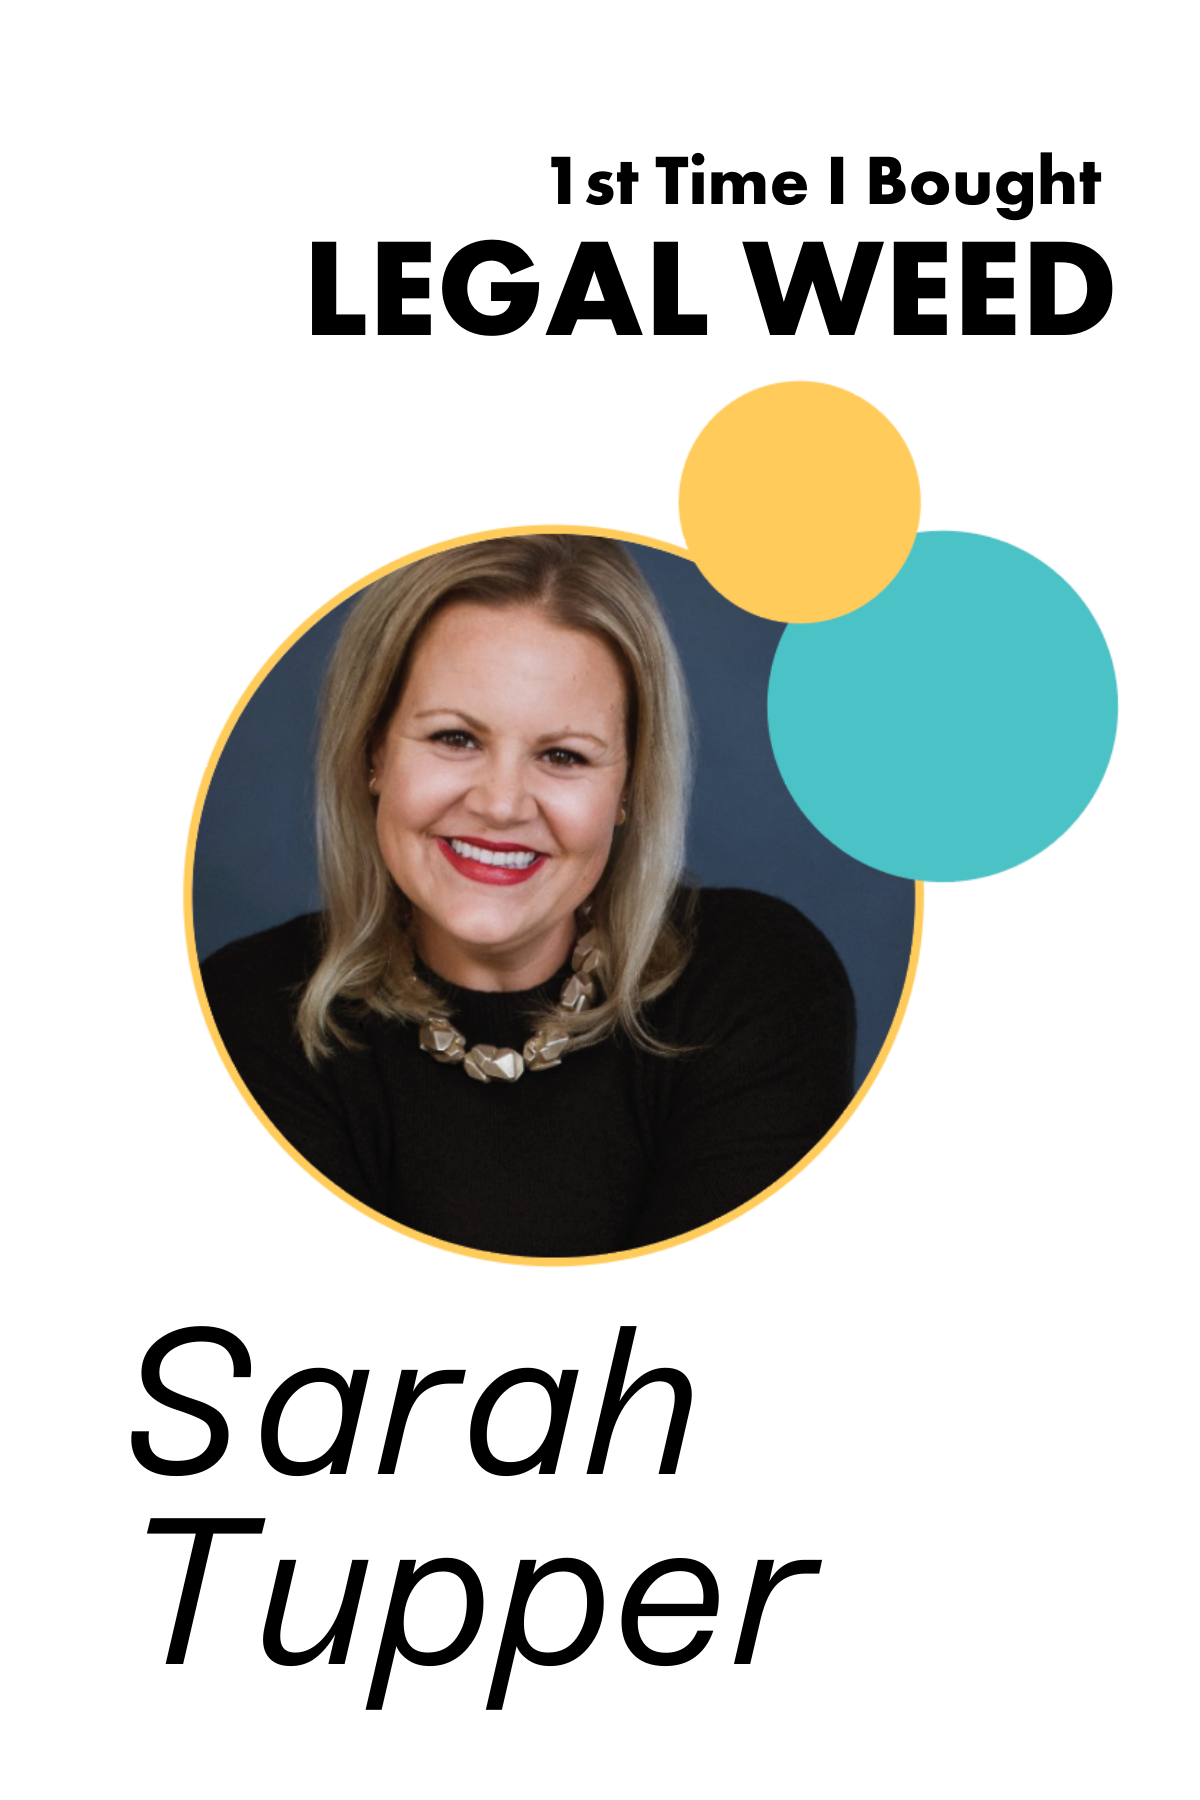 82. 1st Time I Bought Legal Weed: Sarah Tupper Co-Founder of Sarah Jane